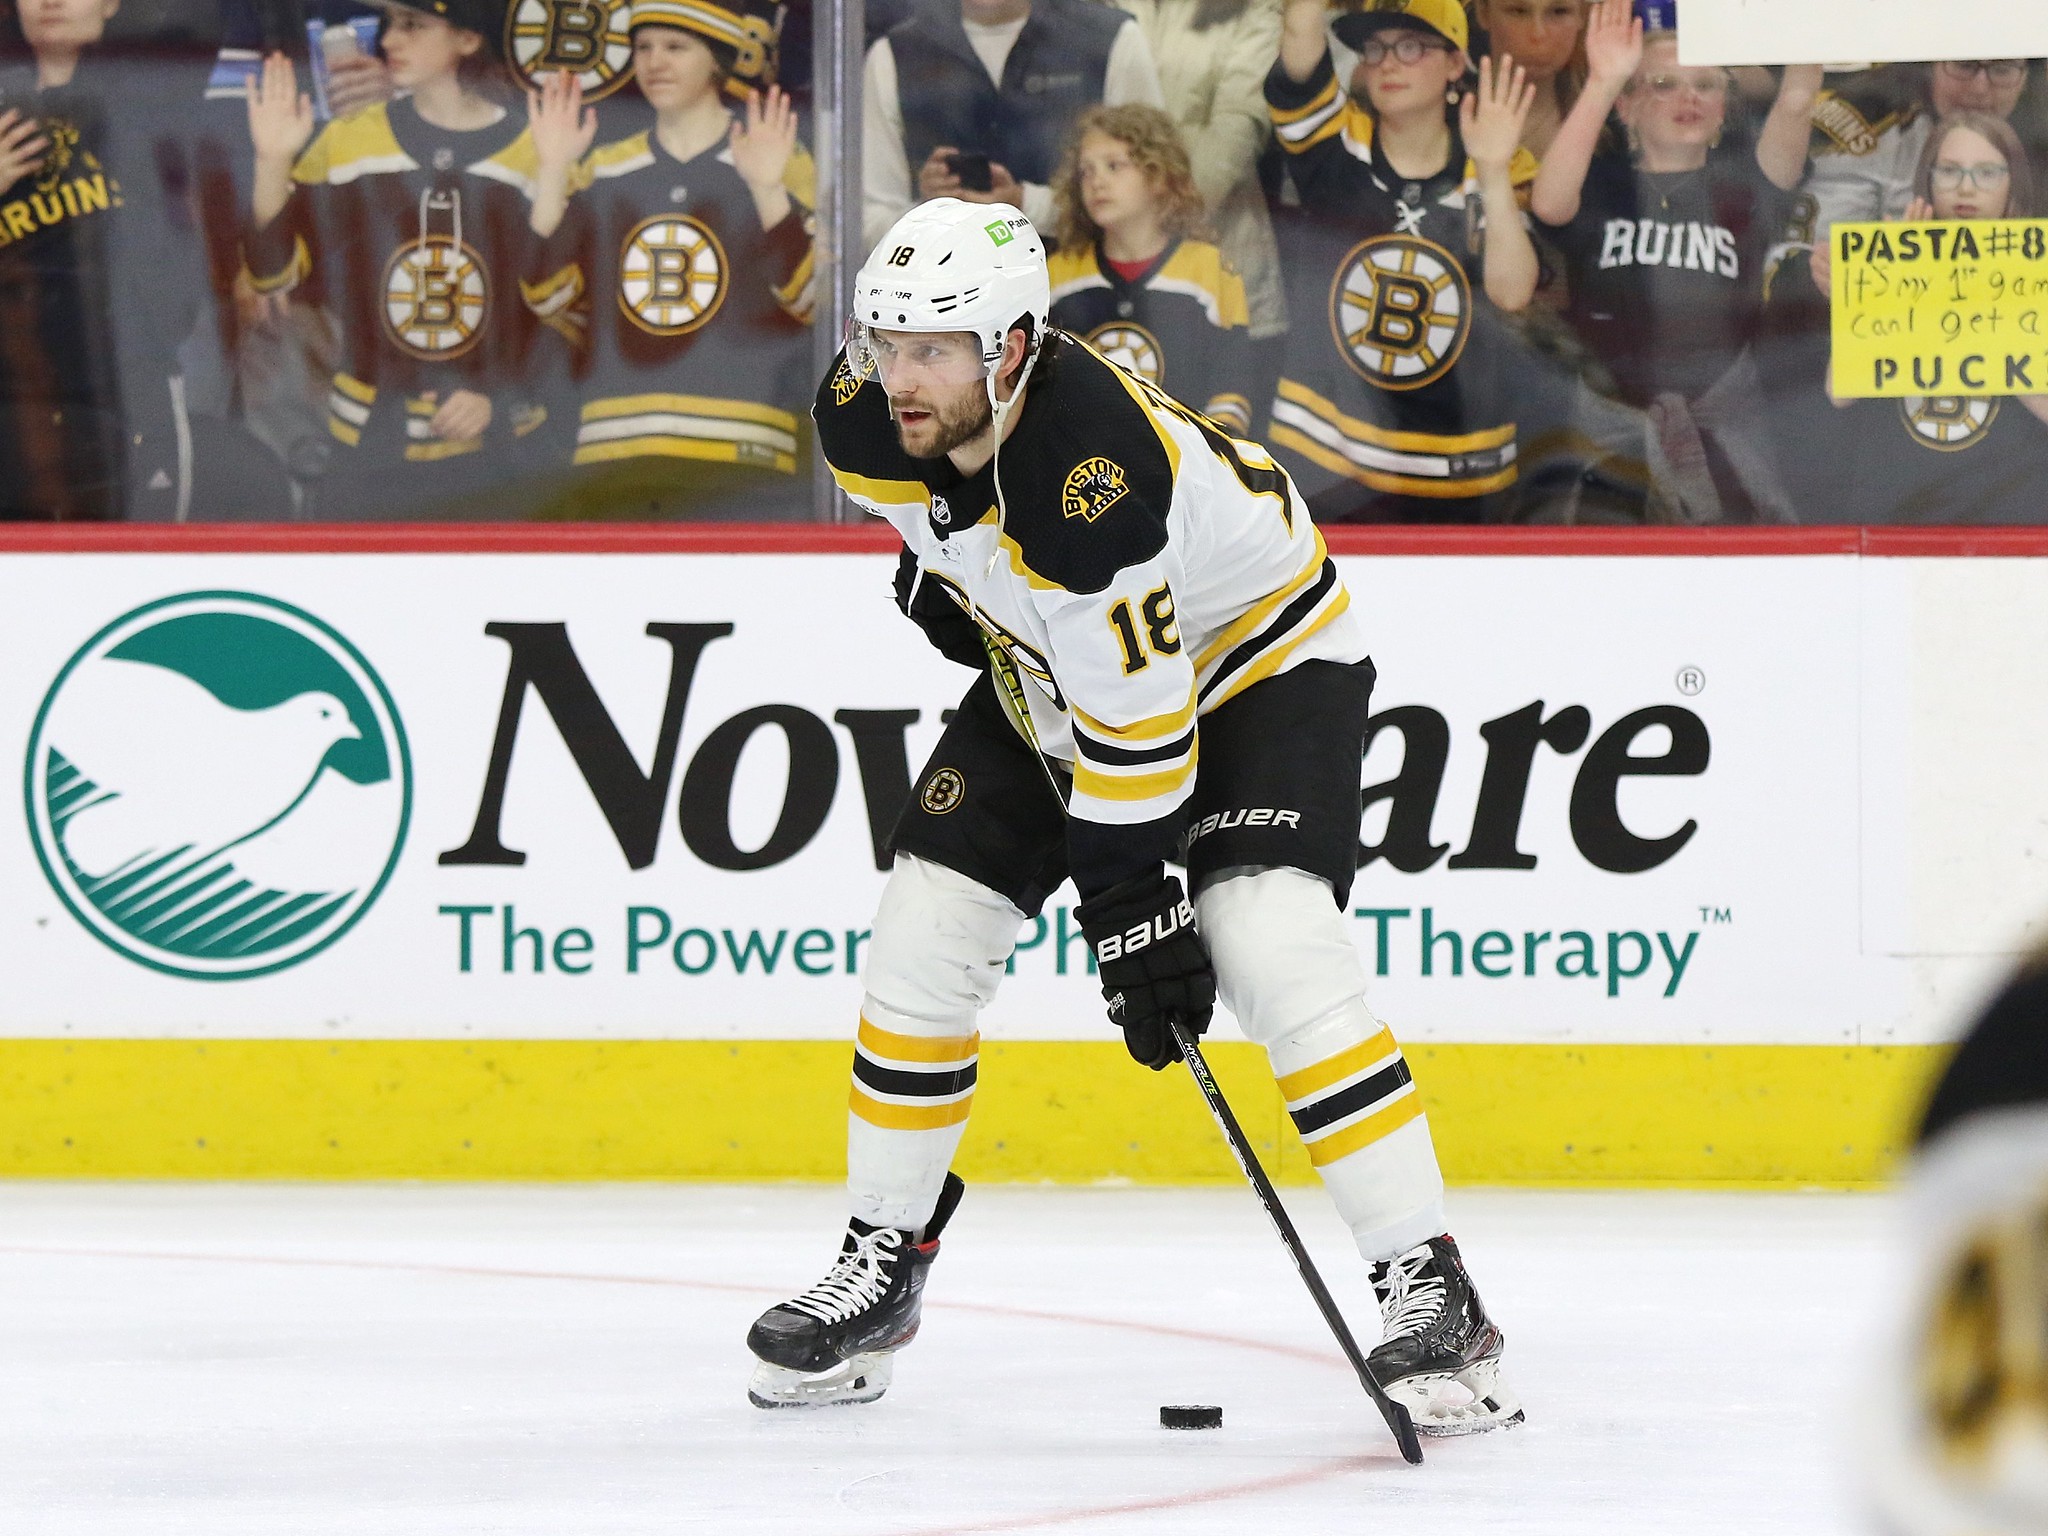 Pavel Zacha has decided on his new number with the Bruins